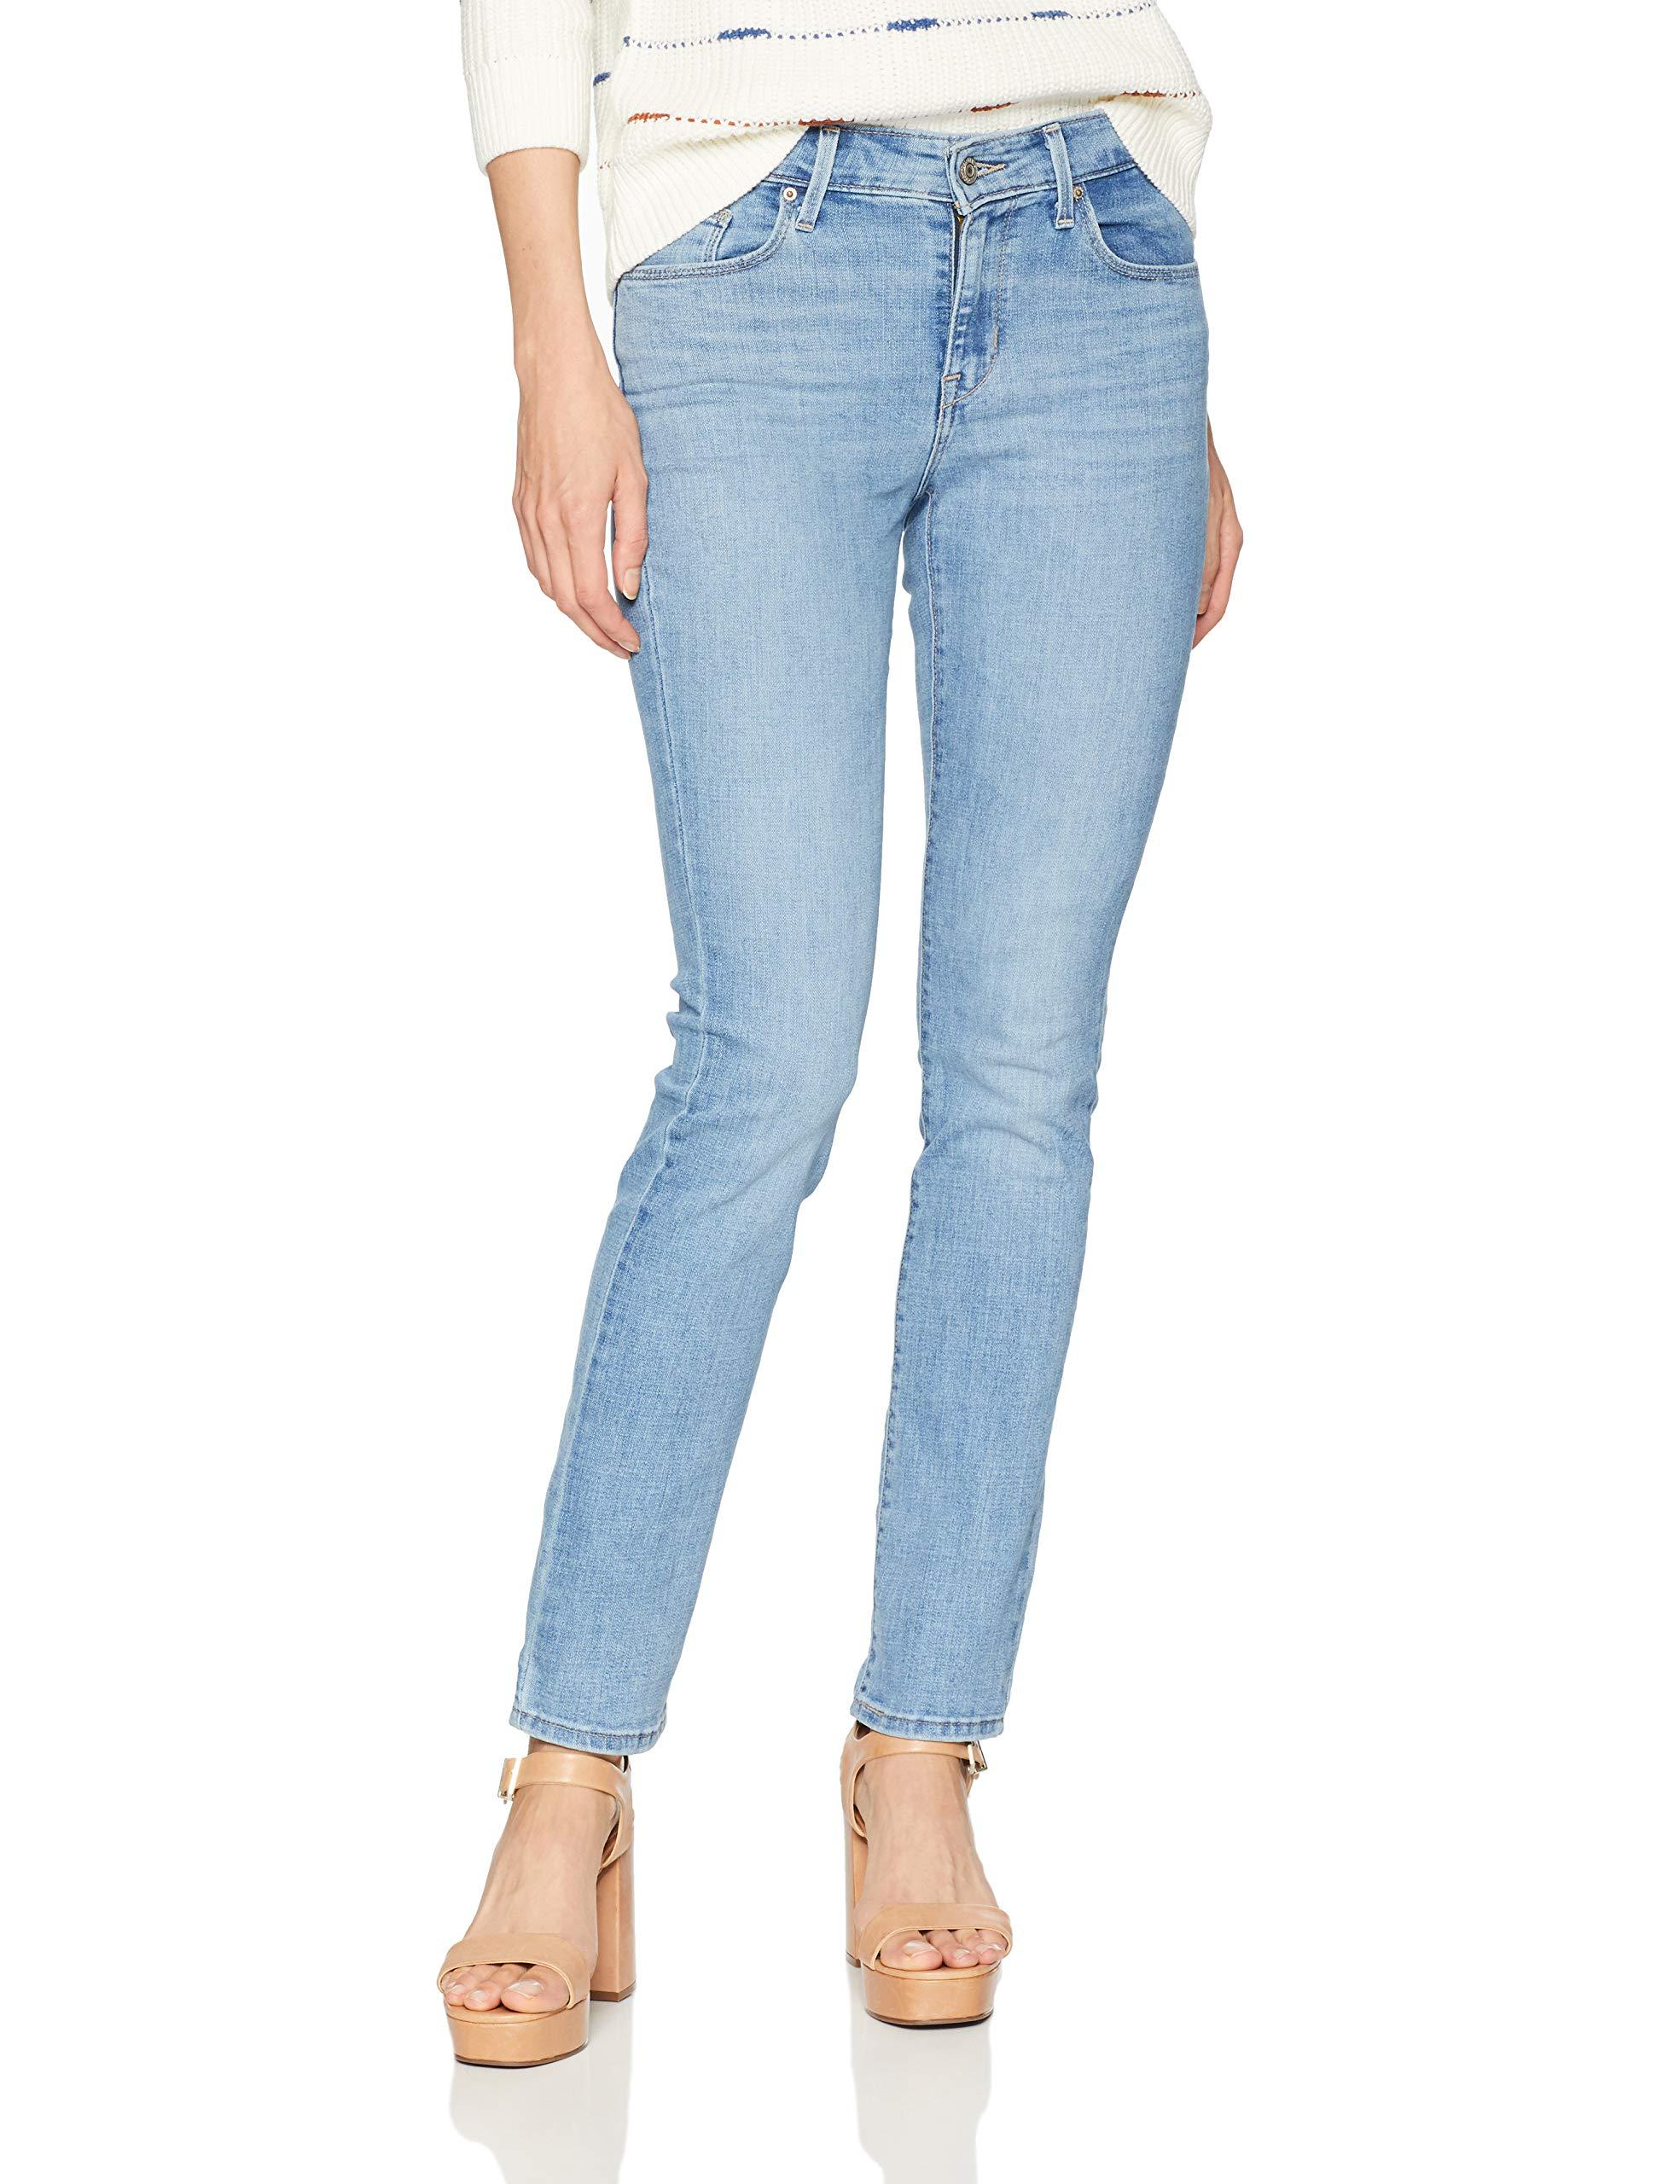 Levi's Denim Classic Mid Rise Skinny Jeans in Blue - Save 41% - Lyst